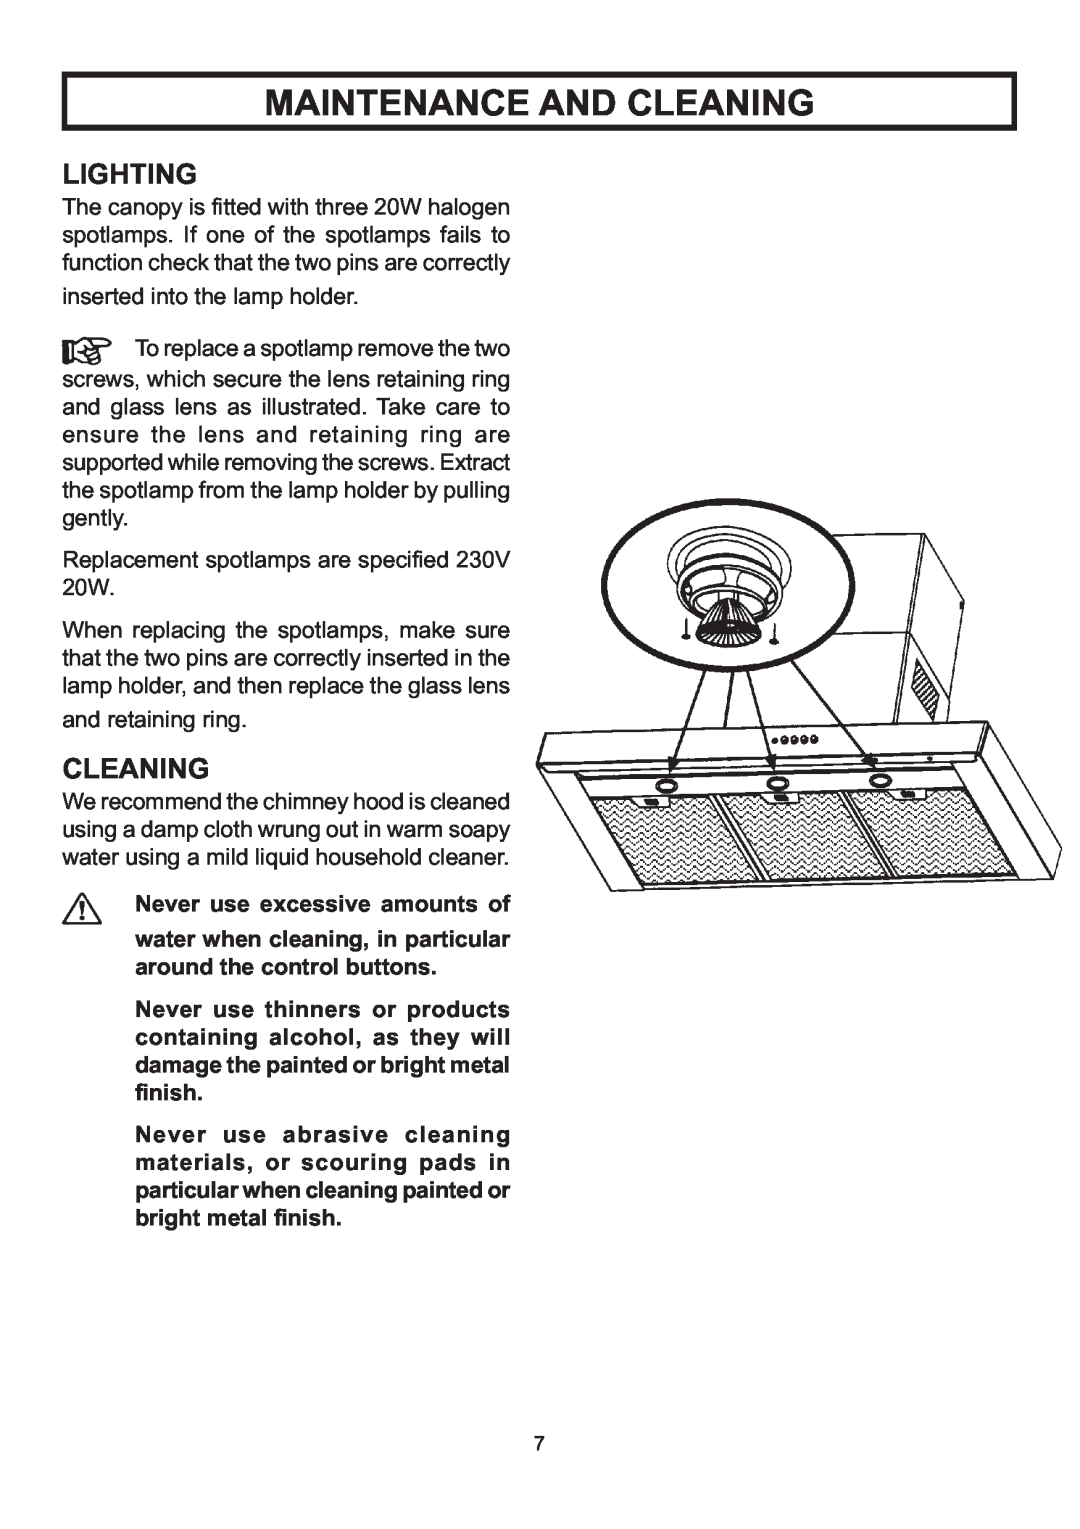 Rangemaster LEIHDS120SC installation instructions Lighting, Never use excessive amounts of, Maintenance And Cleaning 